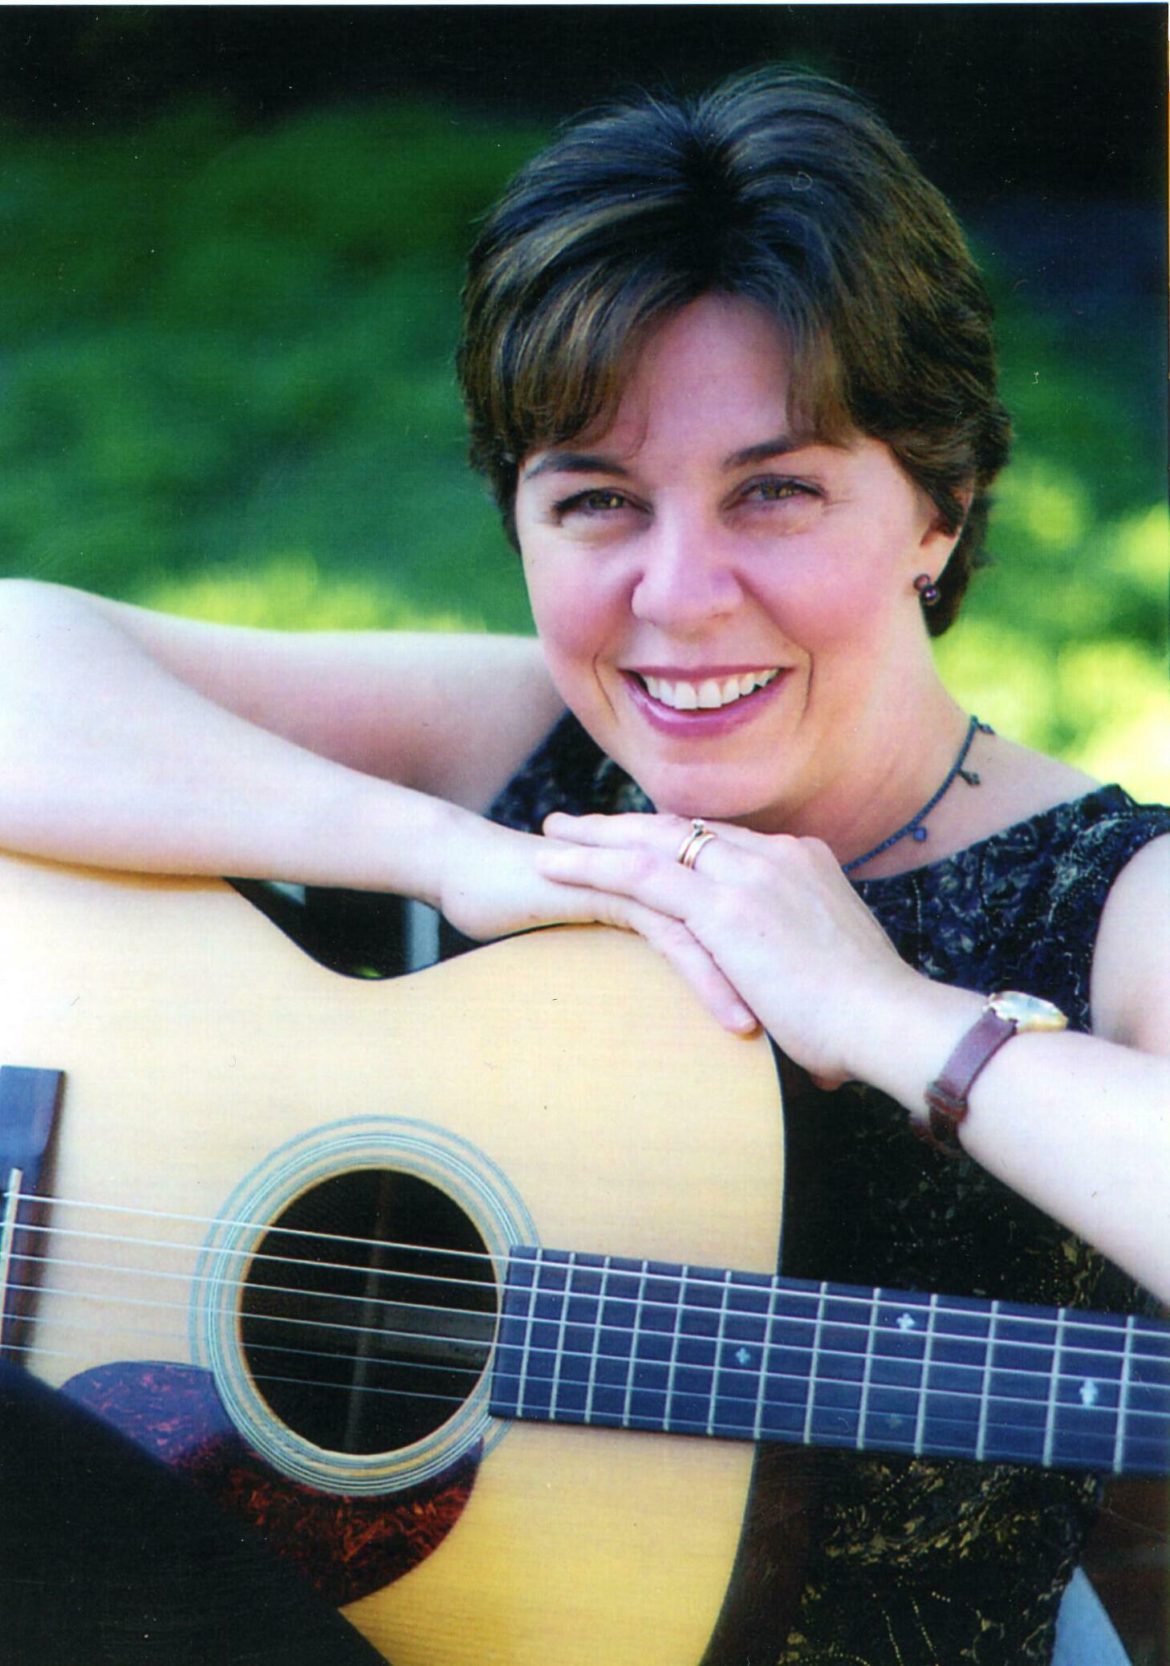 Josée Vachon will sing some of her favorite songs from French Canada when she appears at the Revels Salon Series in October